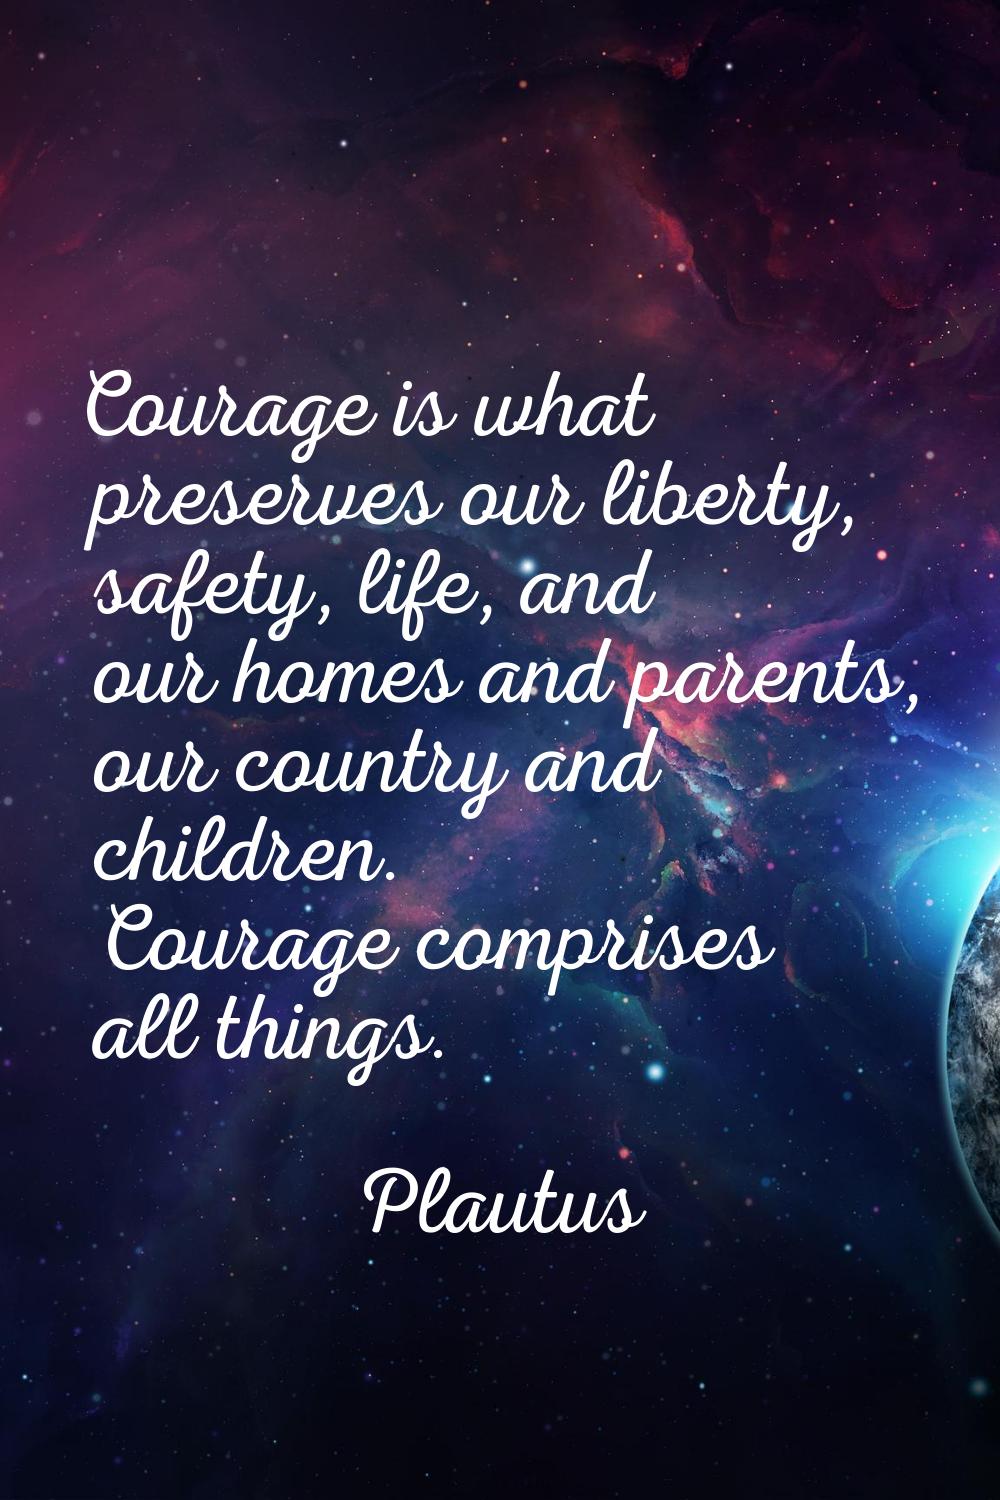 Courage is what preserves our liberty, safety, life, and our homes and parents, our country and chi